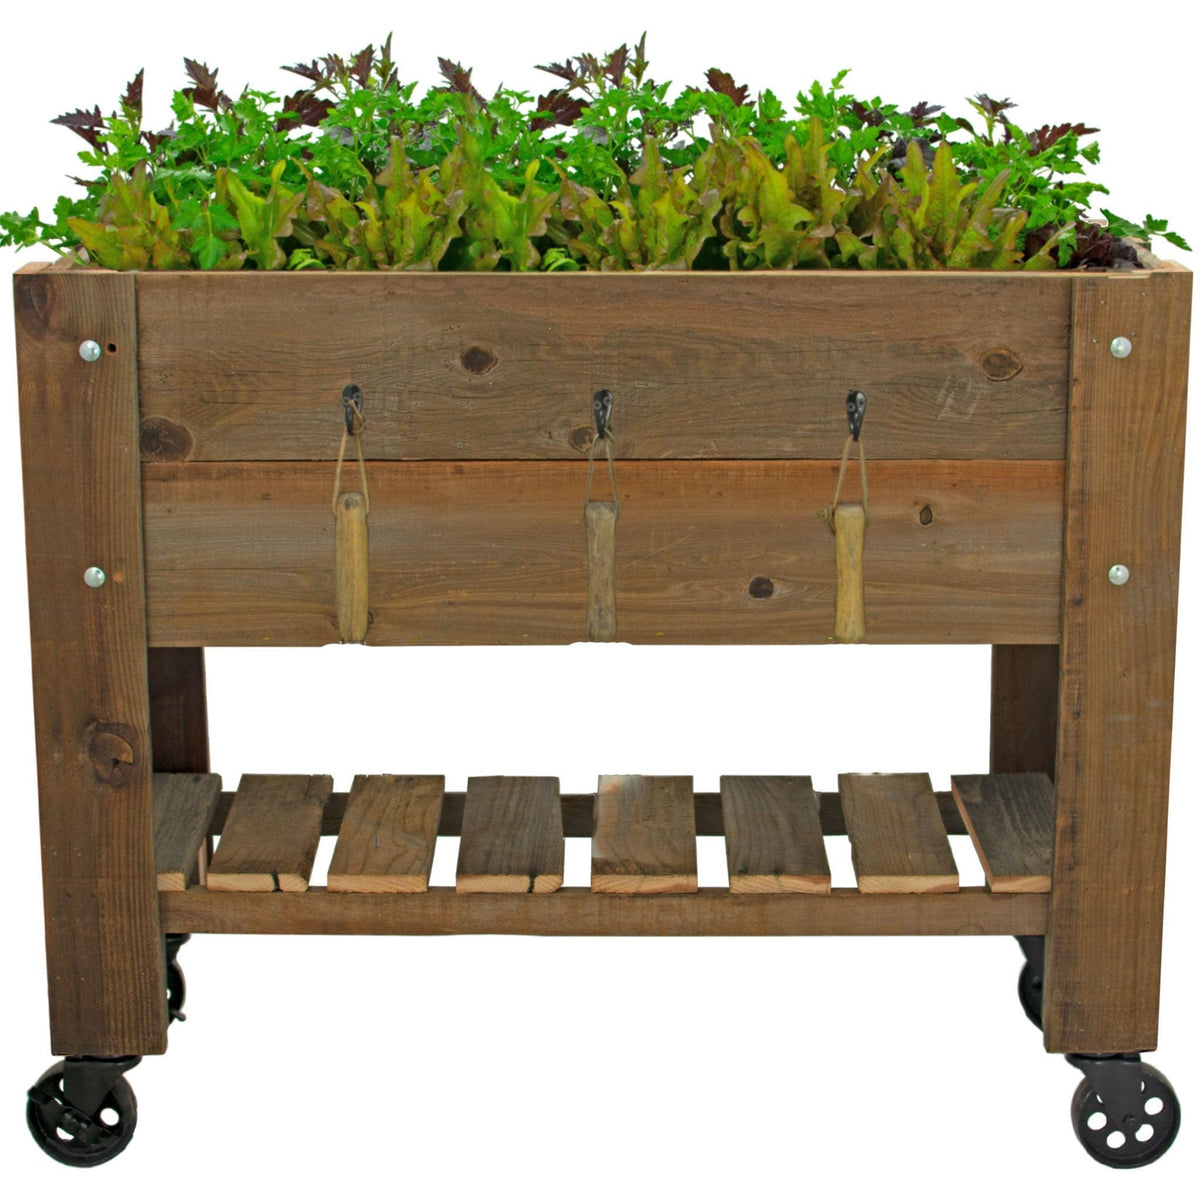 Raised Bed Planter Box on Casters - Lee Display